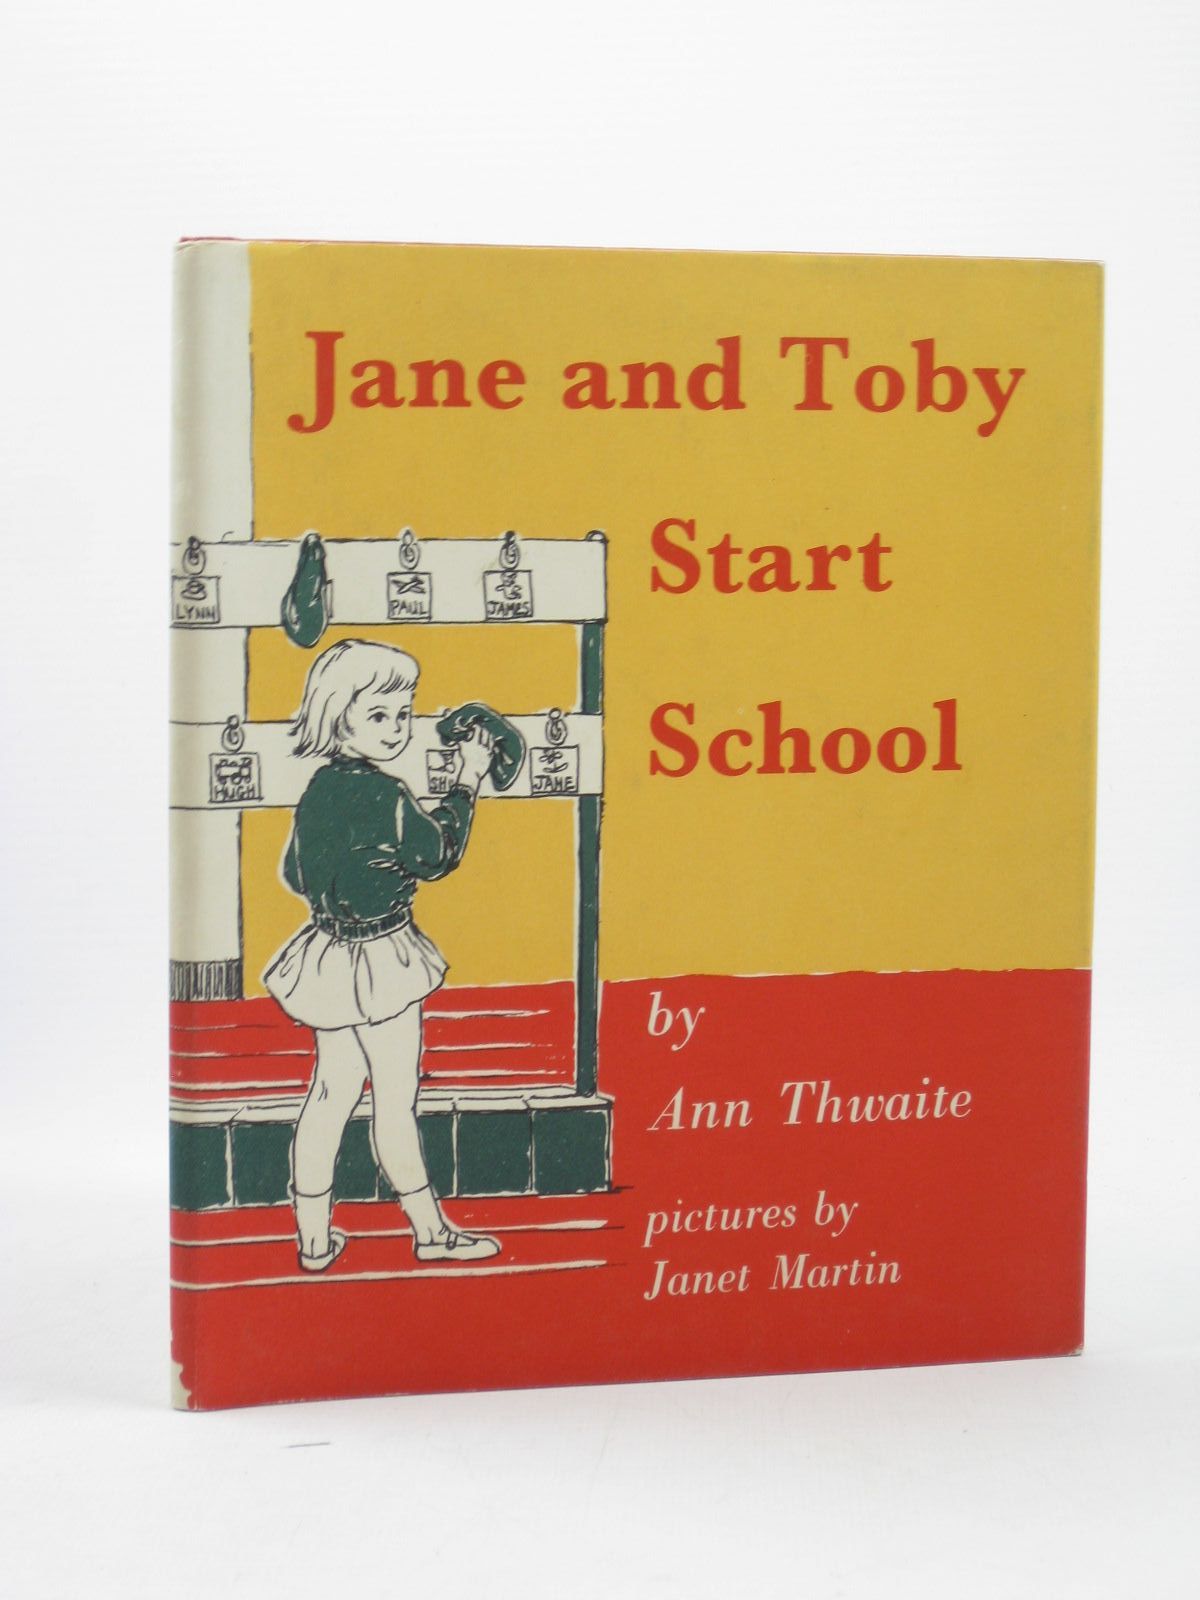 THWAITE, ANN ILLUSTRATED BY MARTIN, JANET - Jane and Toby Start School